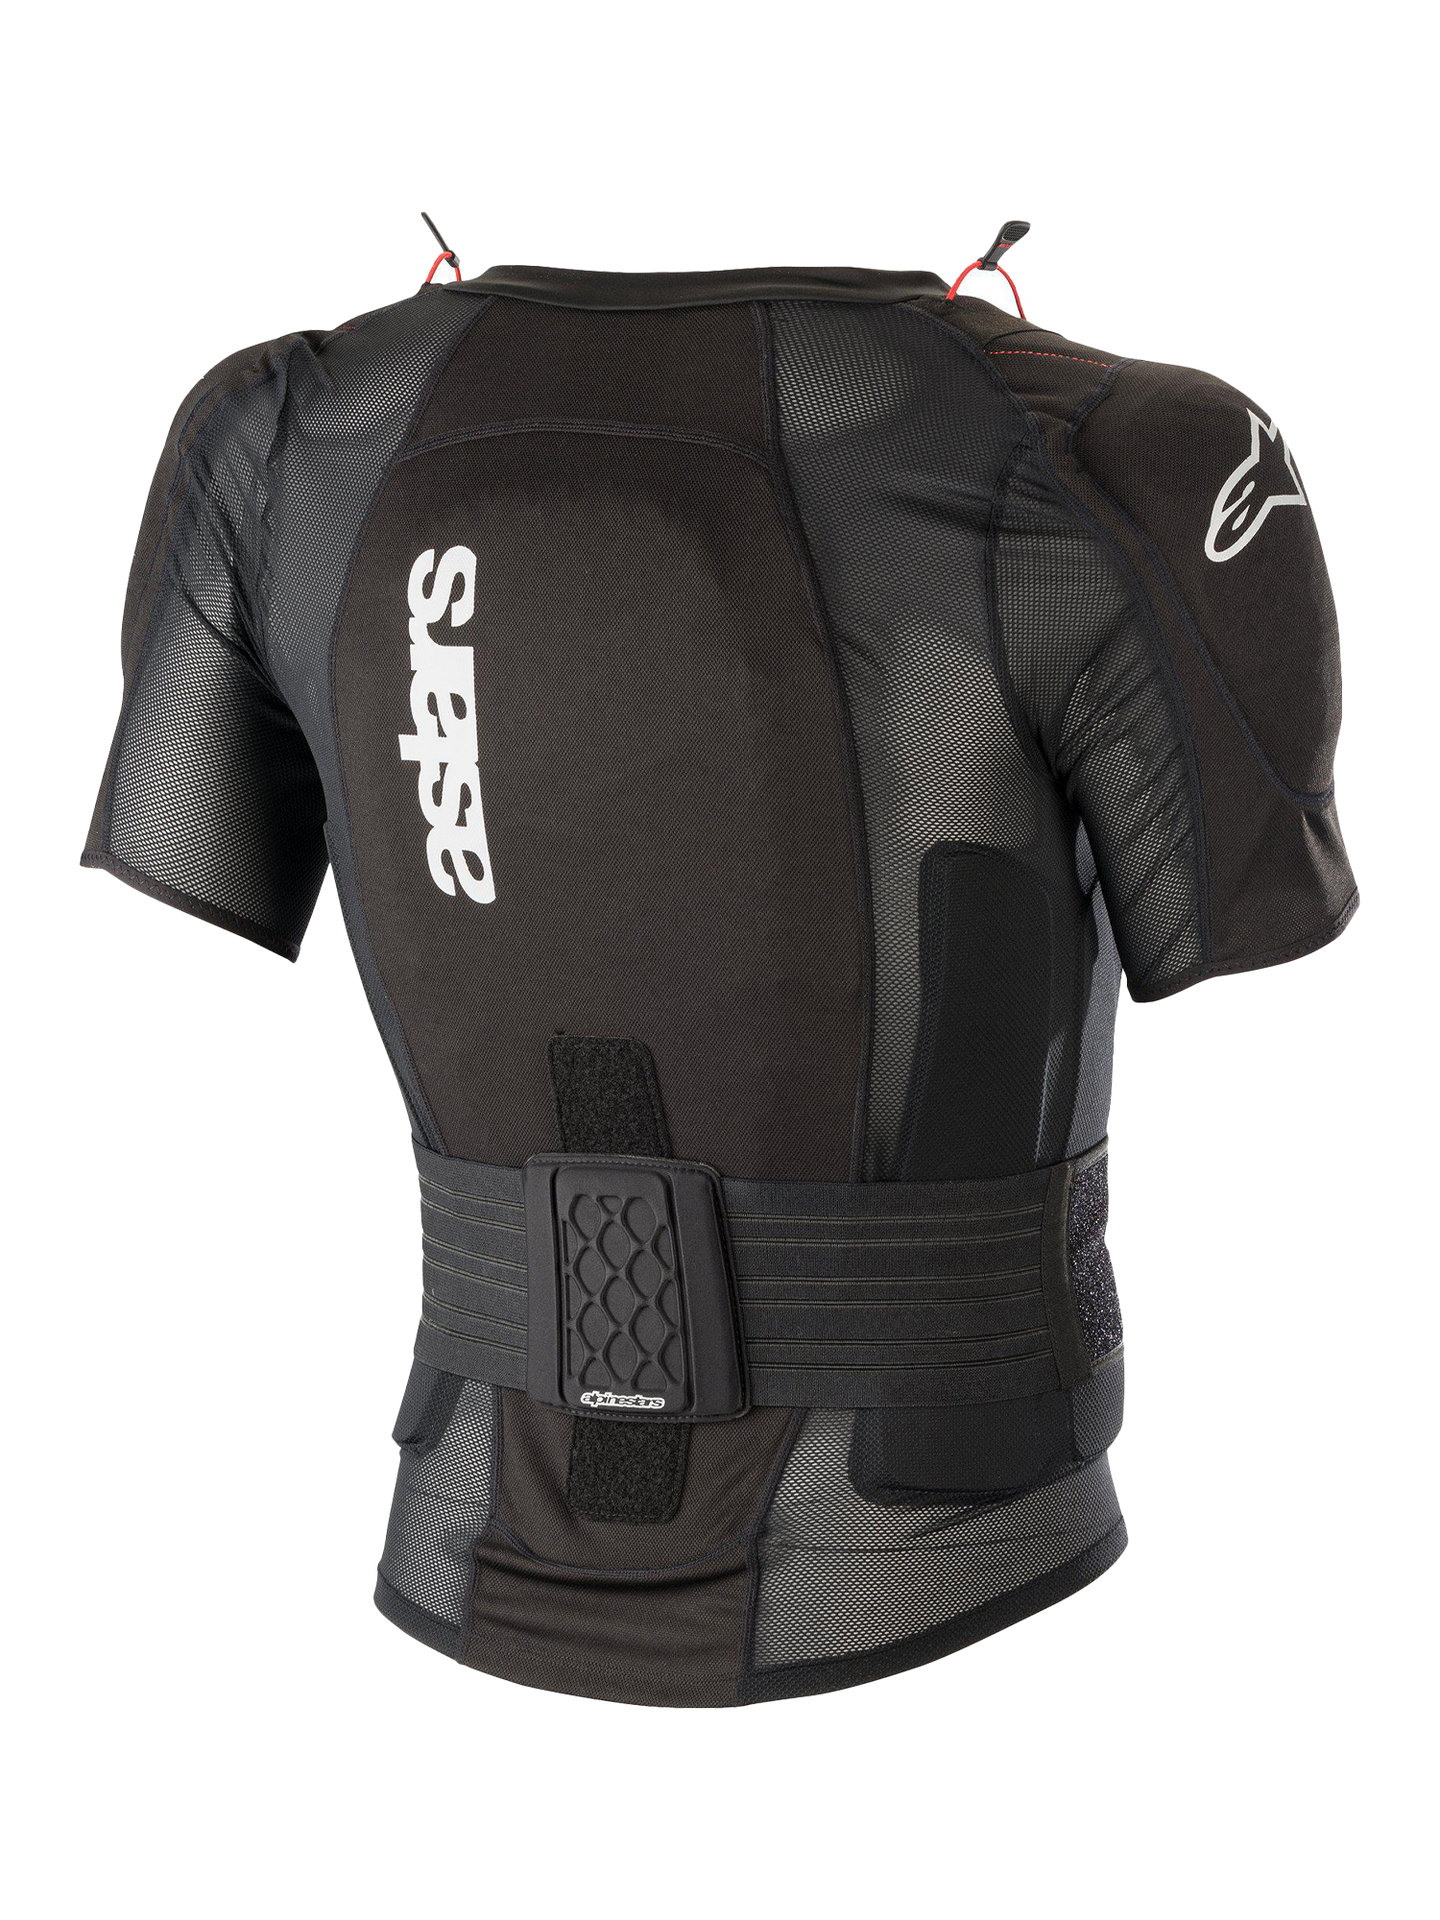 Sequence Protection Jacket  Short Sleeve